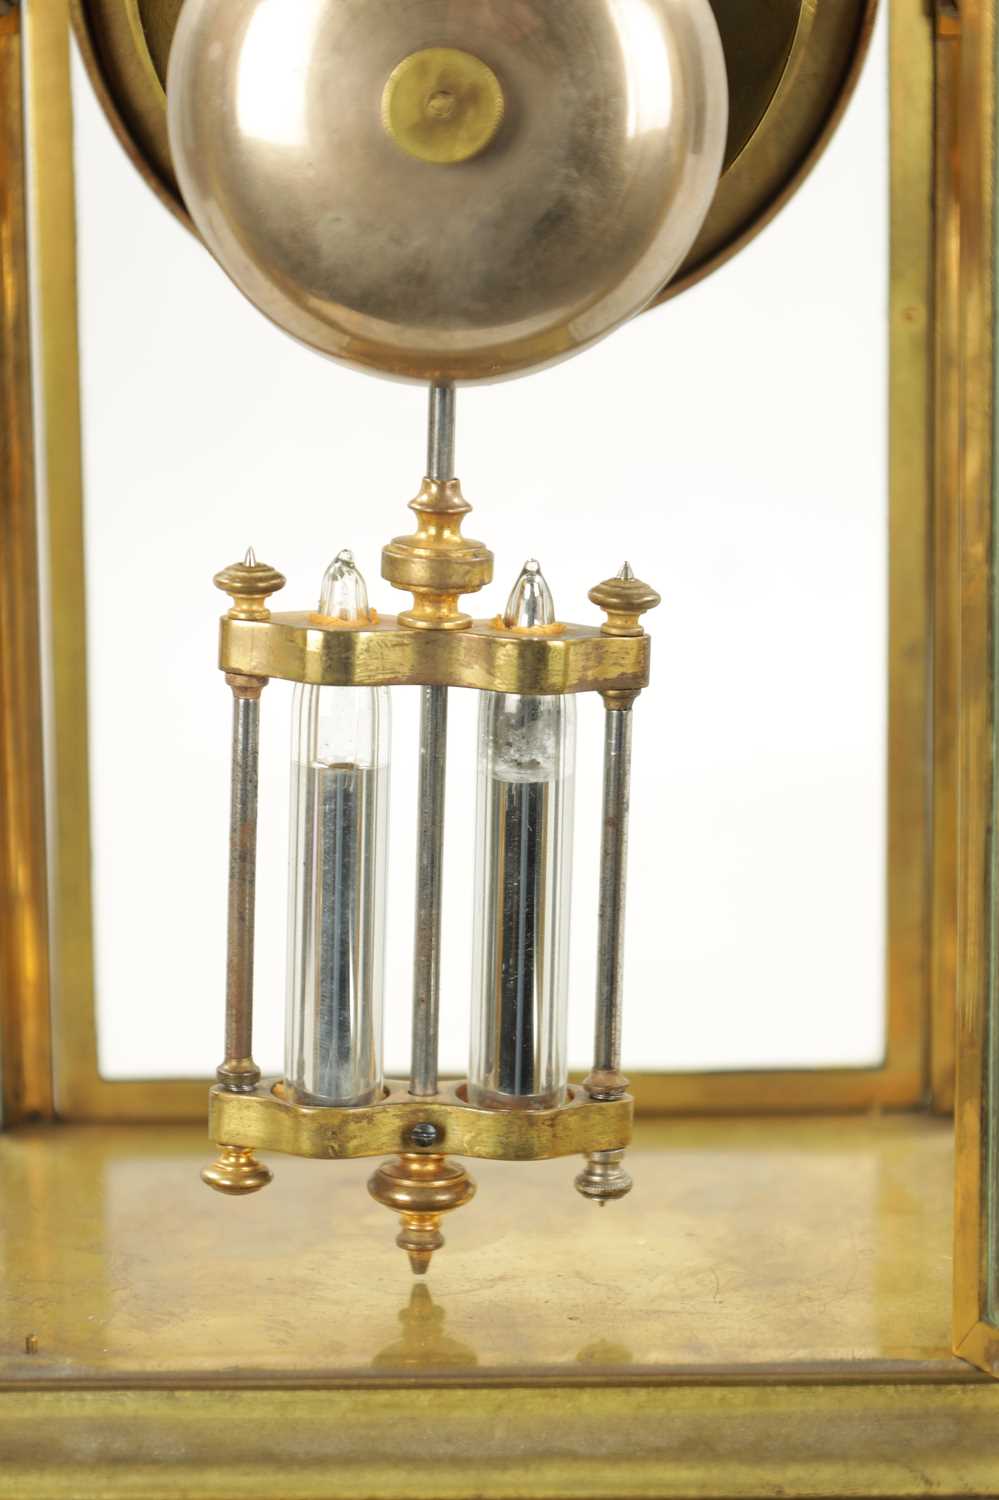 A LATE 19TH CENTURY FRENCH GILT BRASS FOUR-GLASS MANTEL CLOCK - Image 8 of 10